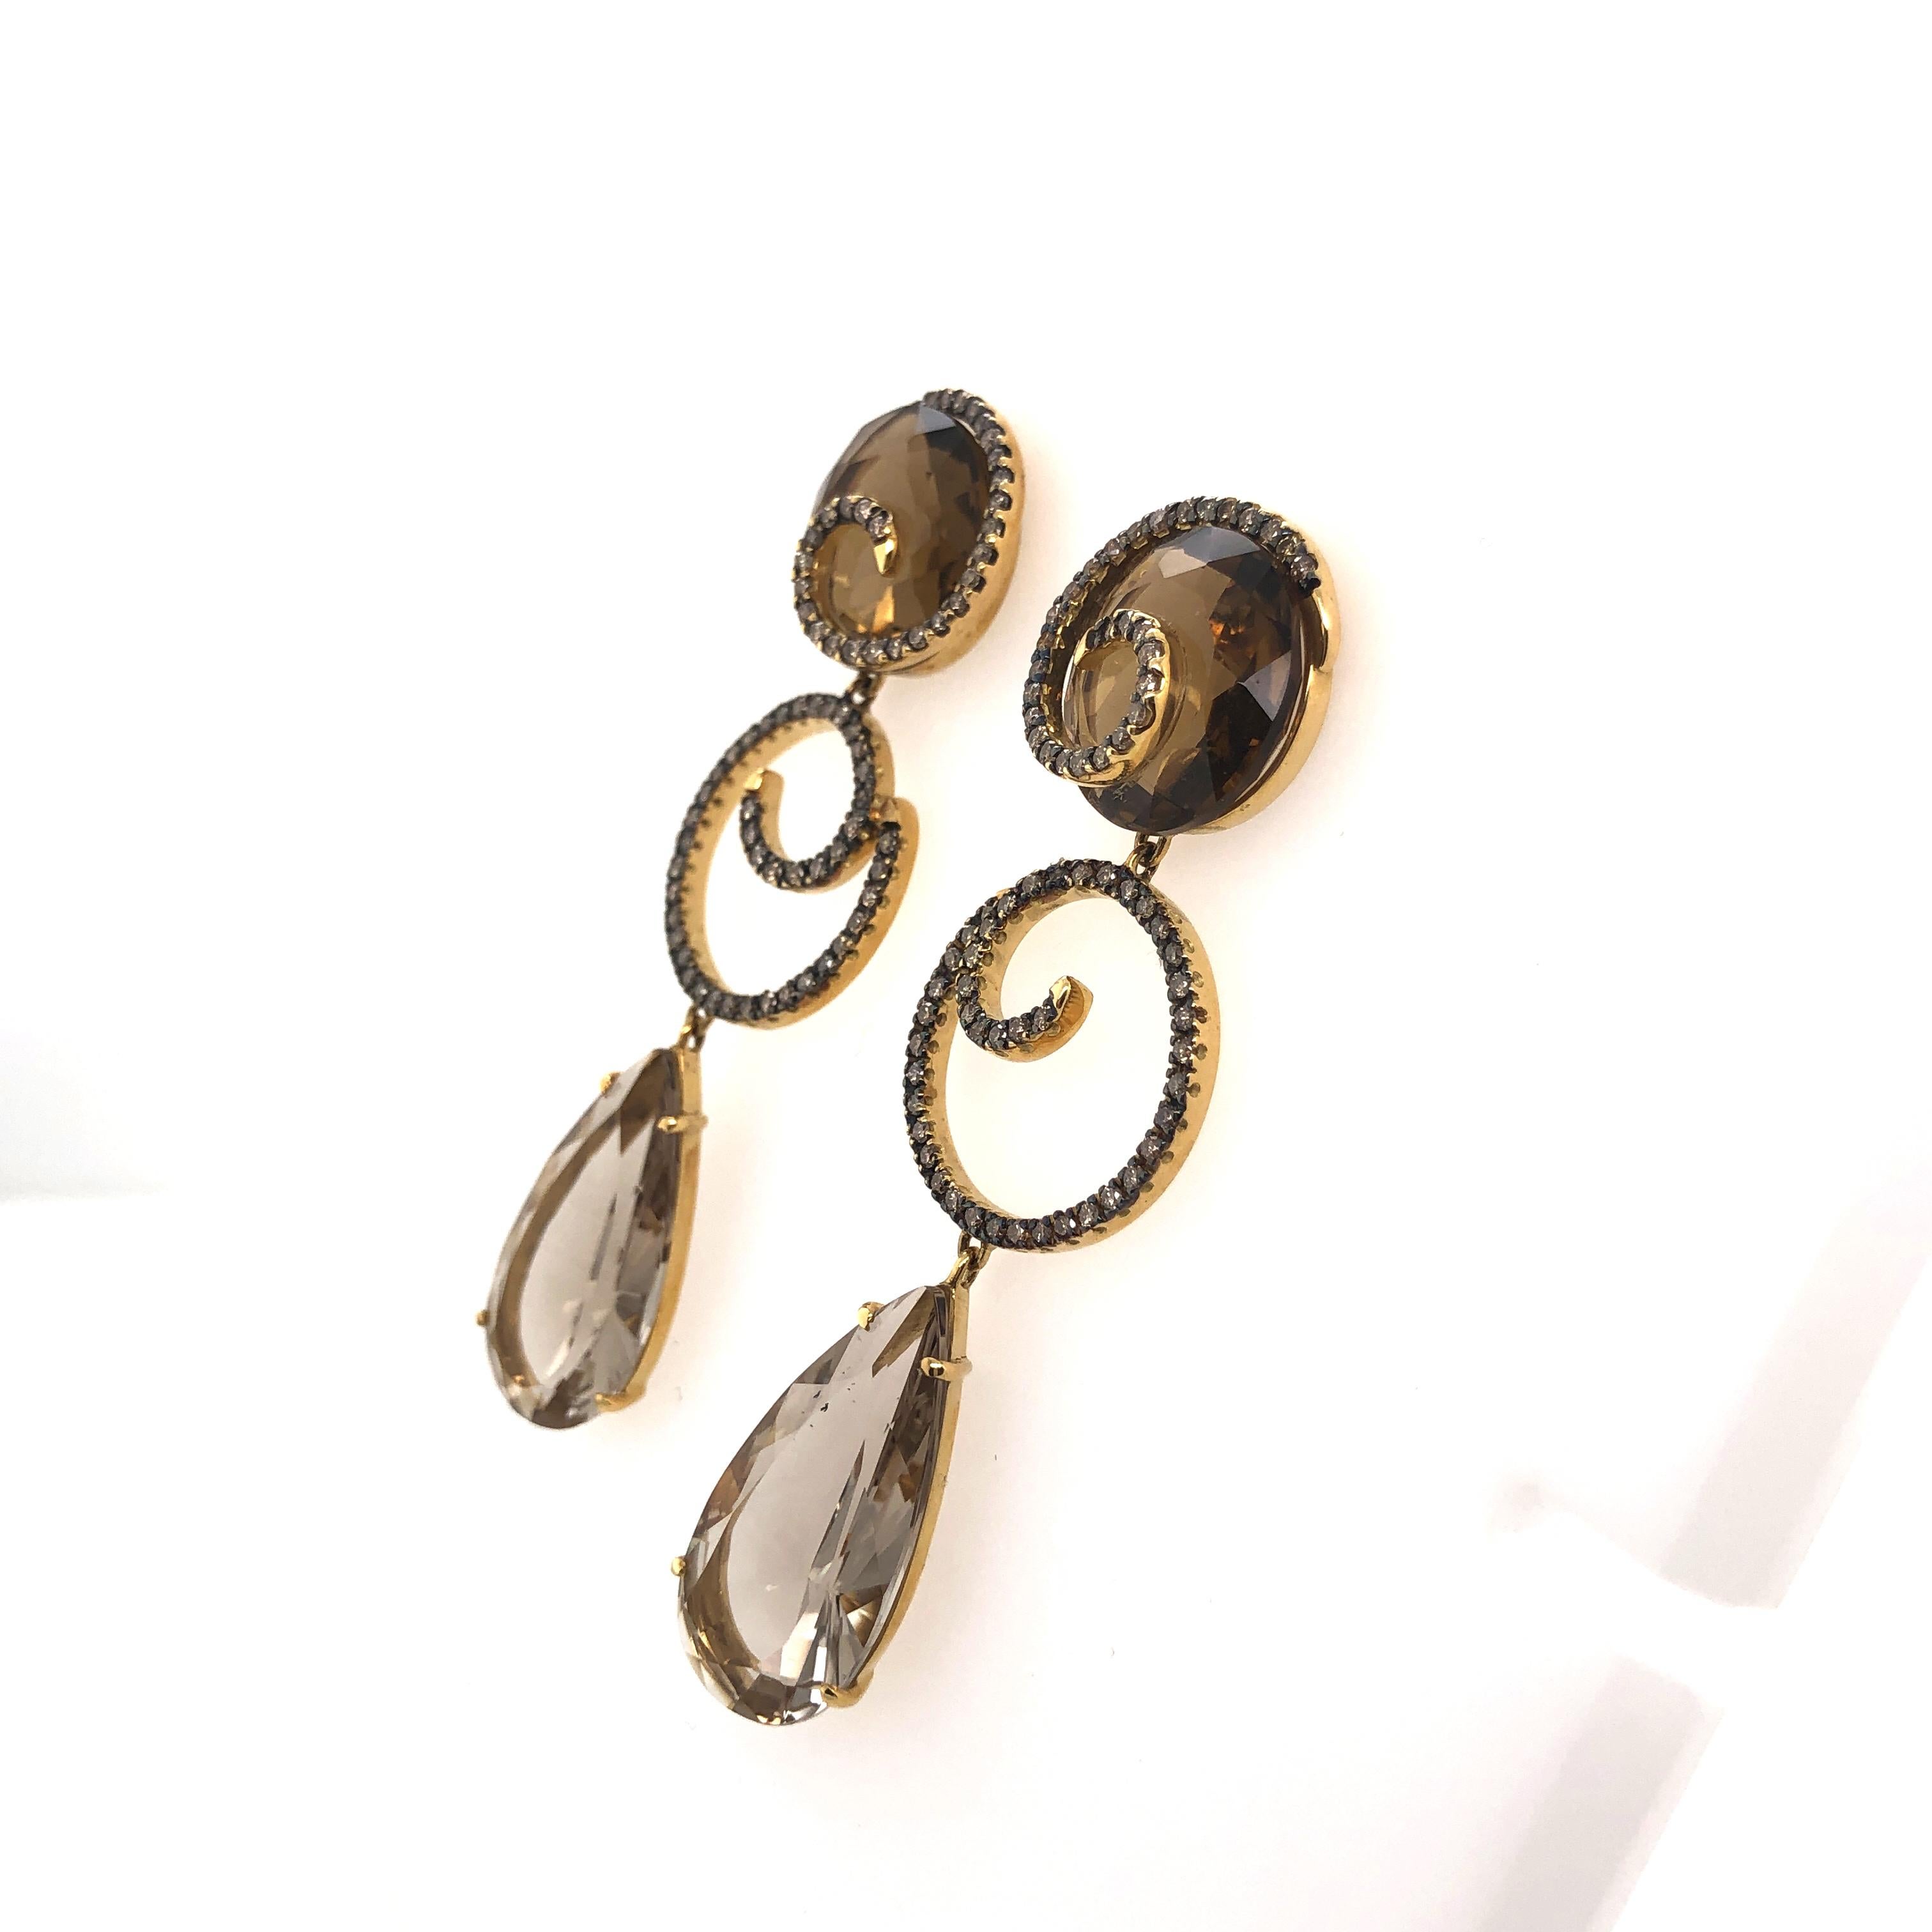 Stunning Citrine, Quartz and Diamond Drop Earrings Set in 18 Karat Yellow Gold In New Condition For Sale In New York, NY